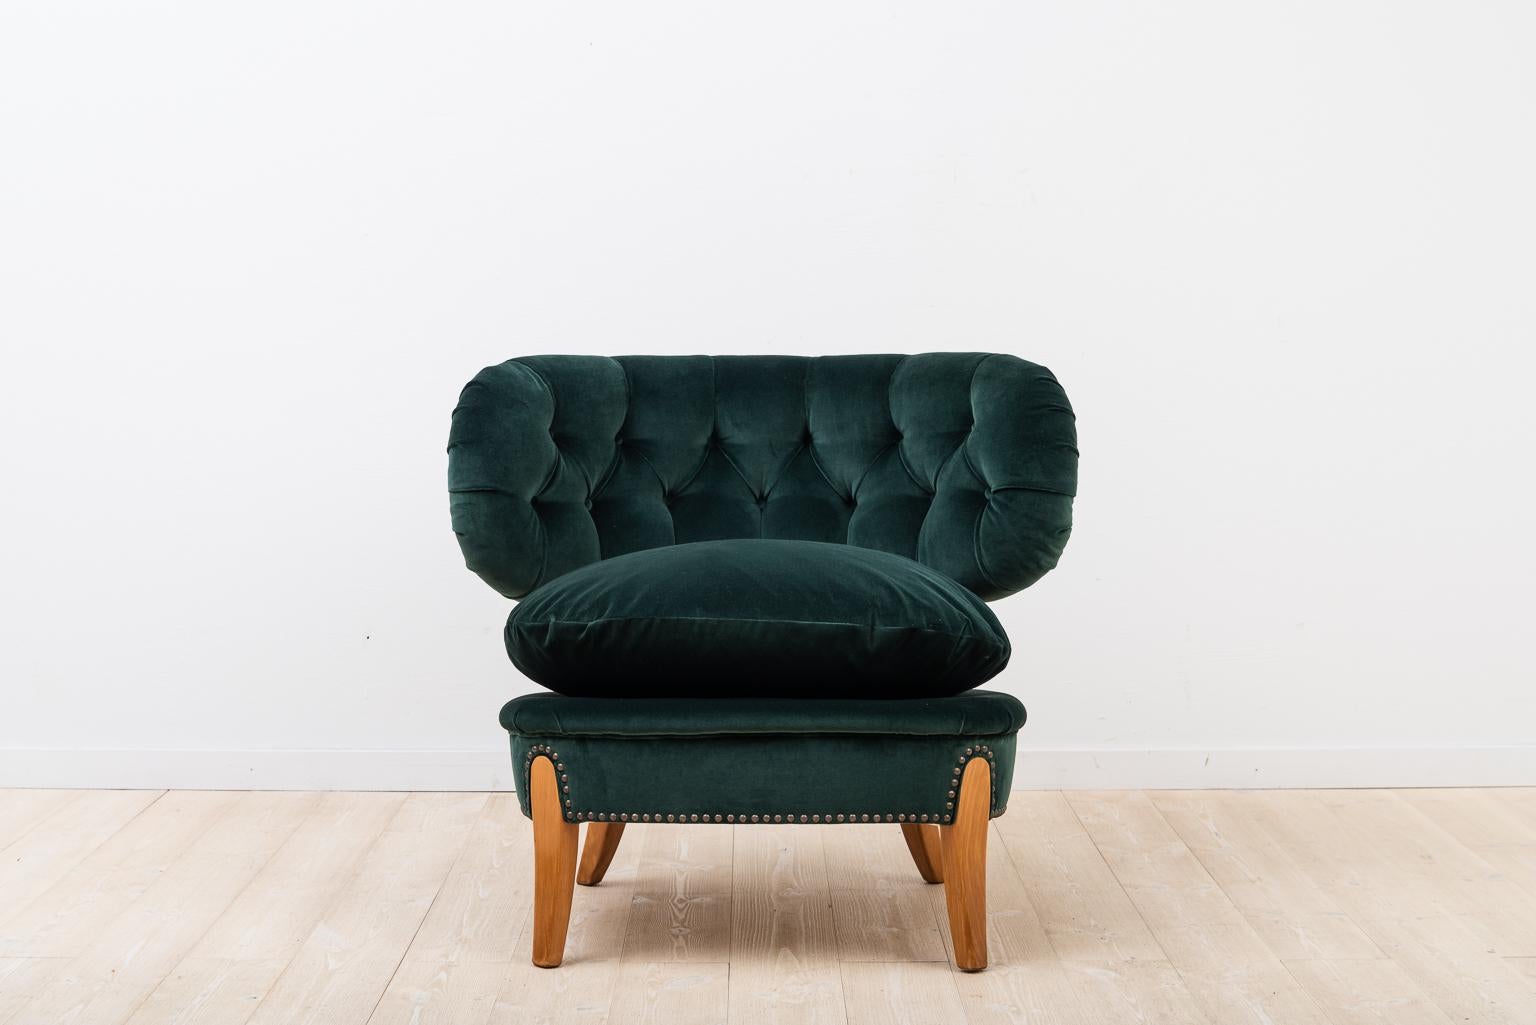 Lounge chair Schultz by Otto Schultz from the 20th century. The lounge chair was manufactured by Jio furniture and defined by Schultz in 1936. The chair has recently been renovated. The upholstery is new and made in emerald green plush fabric. The